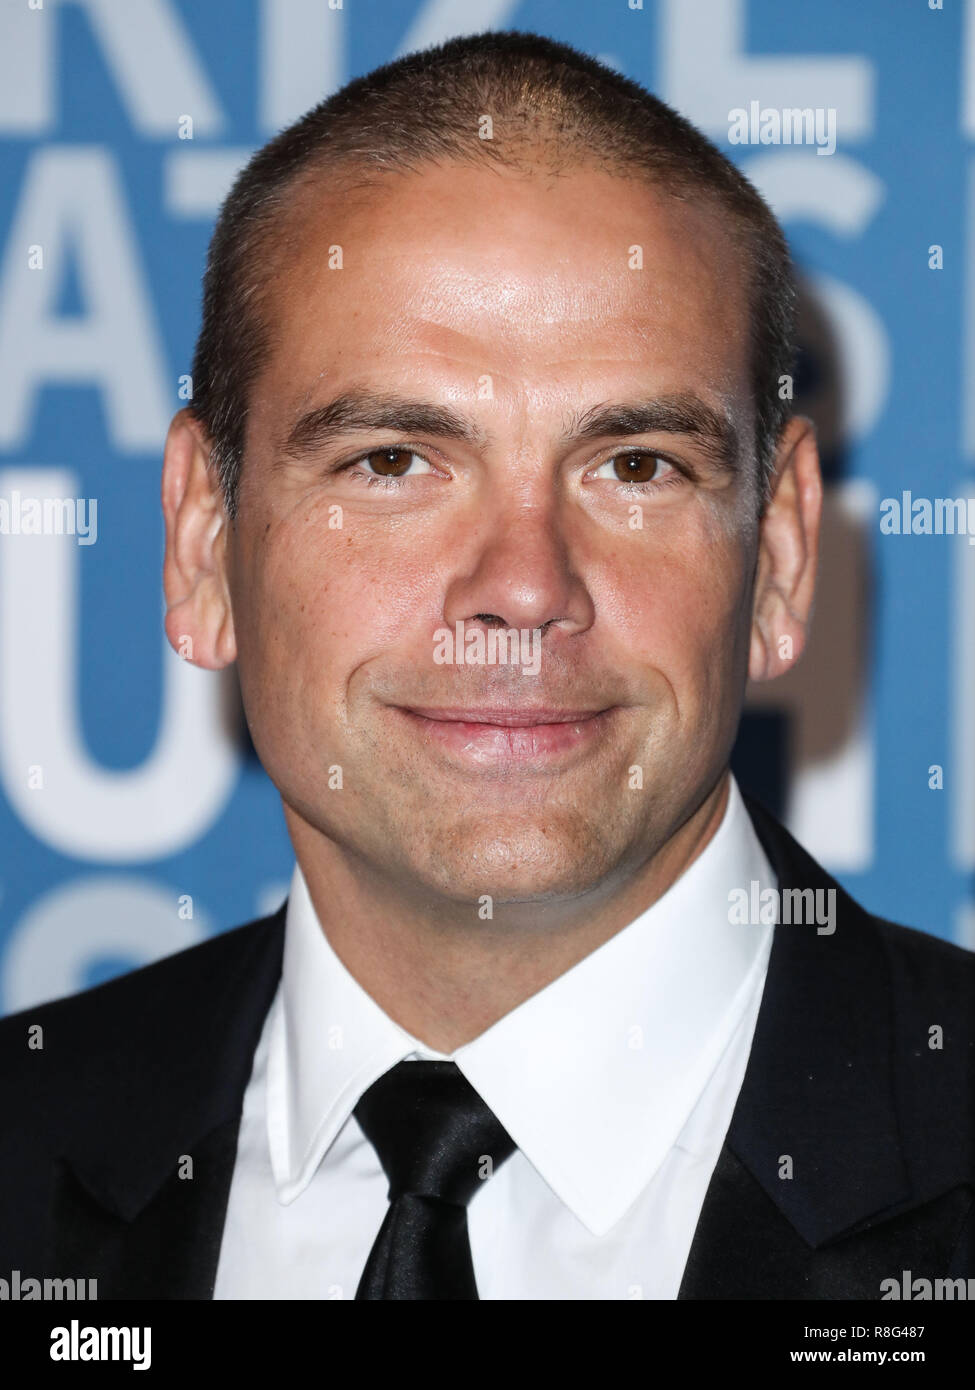 MOUNTAIN VIEW, CA, USA - DECEMBER 03: Lachlan Murdoch at the 2018 Breakthrough Prize Ceremony held at the NASA Ames Research Center on December 3, 2017 in Mountain View, California, United States. (Photo by Xavier Collin/Image Press Agency) Stock Photo